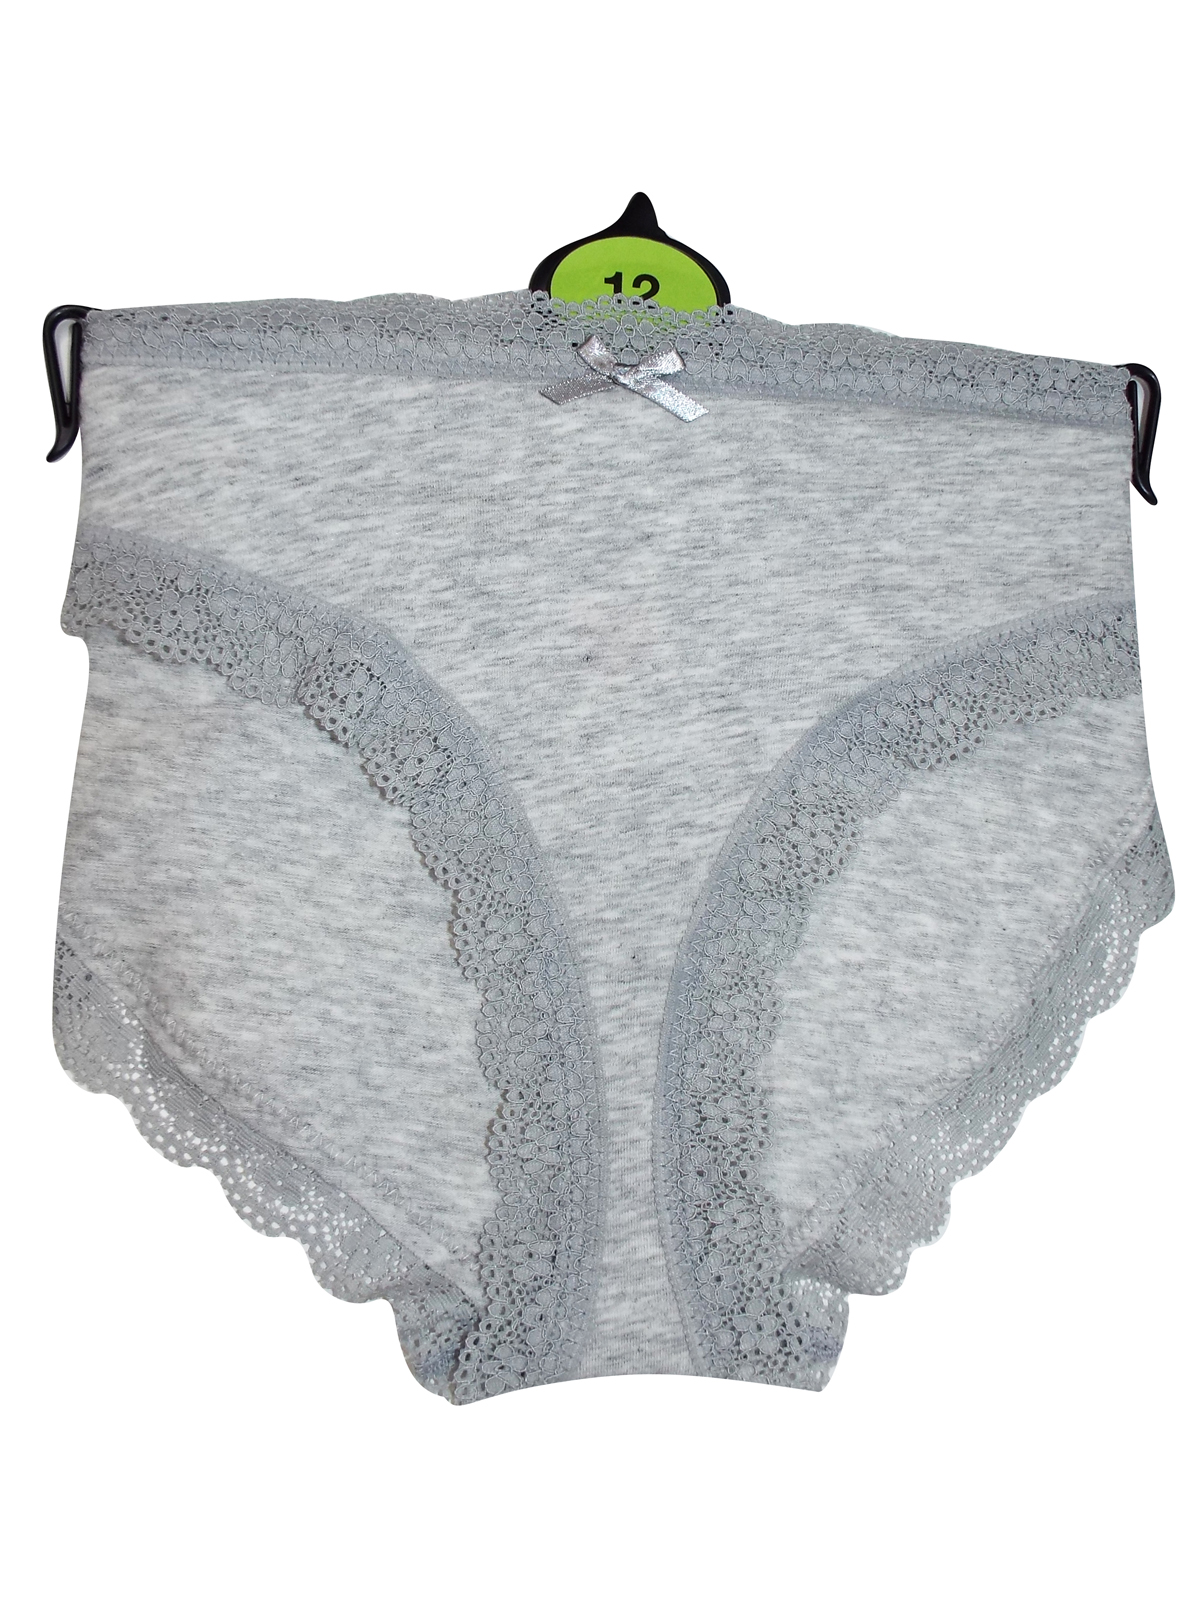 Topshop - - T0PSHOP GREY Lace Trim Mini Knickers - Size 8 to 16